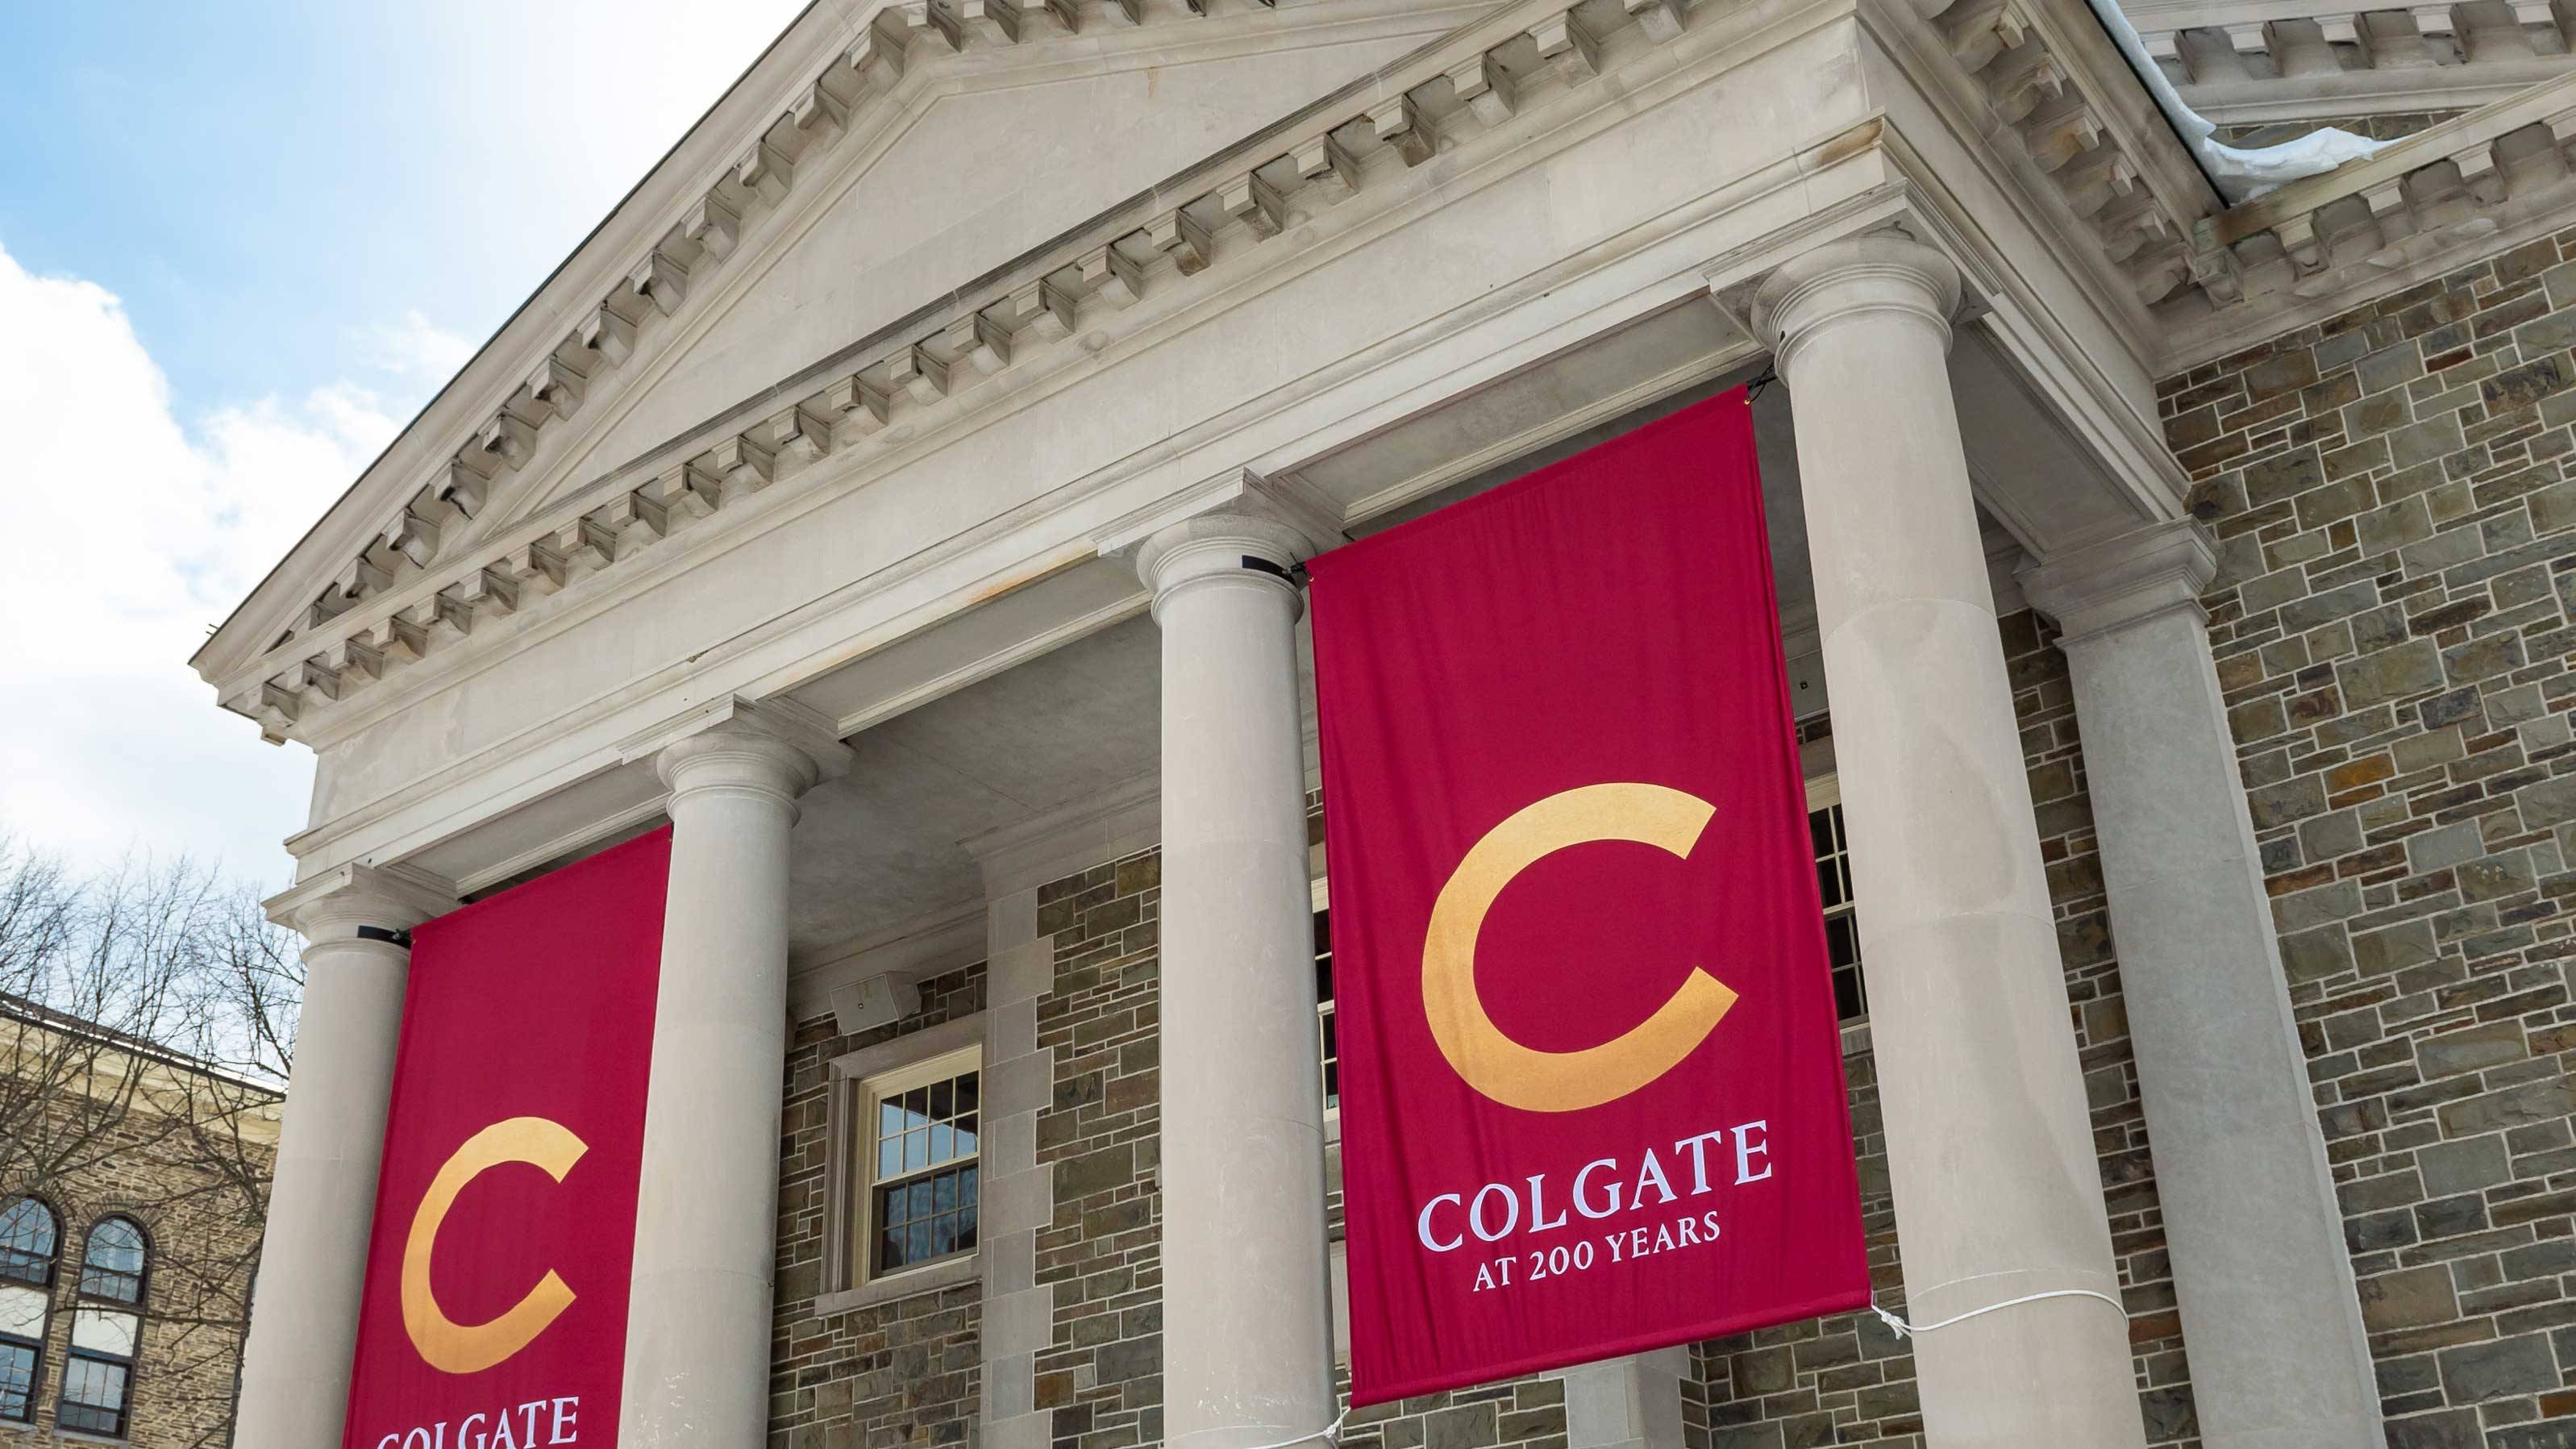 Chapel columns with Colgate at 200 Years banners